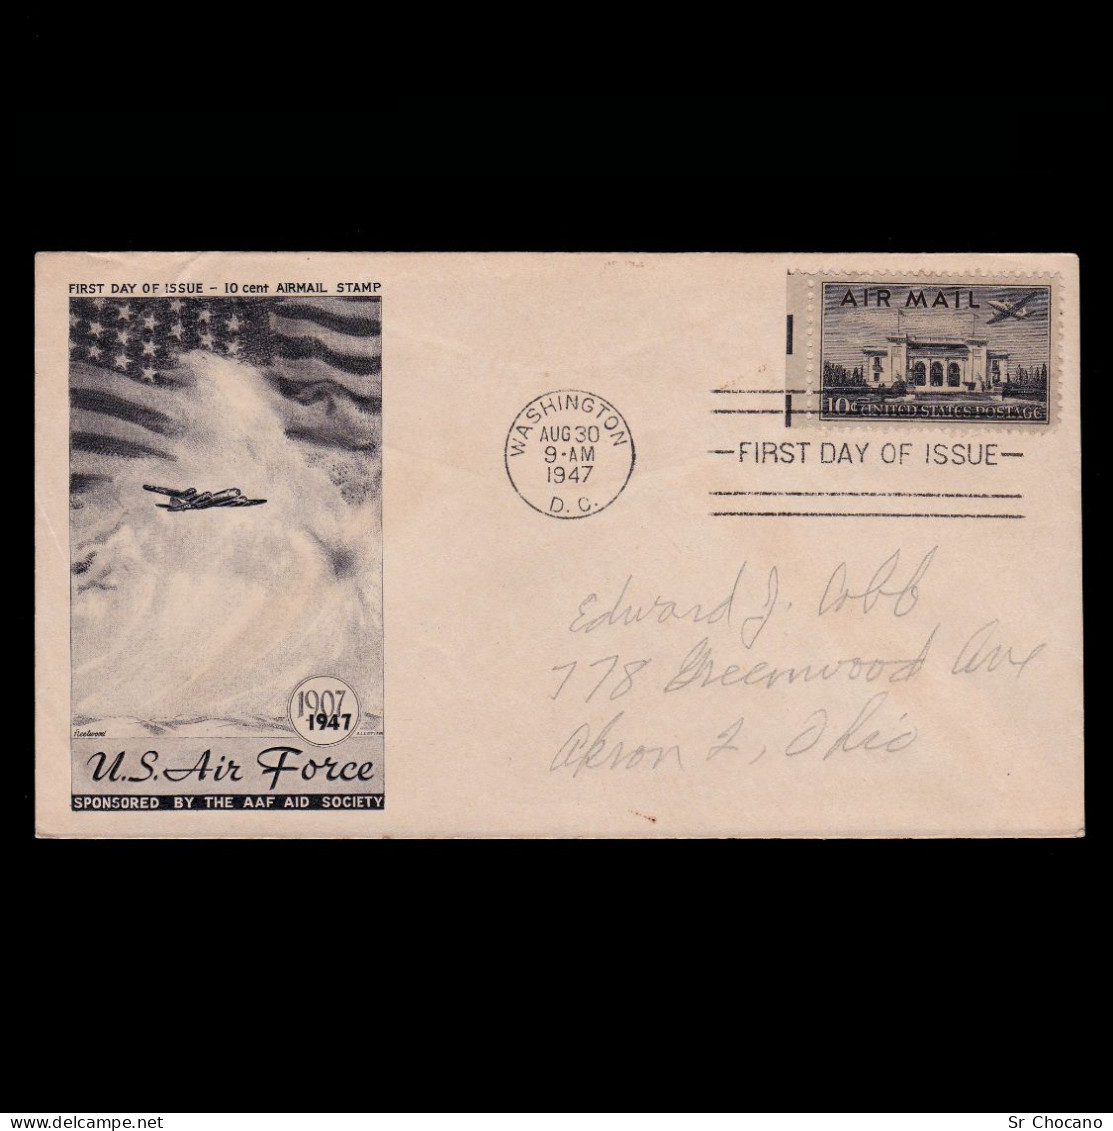 US.AIR MAIL.1947.10c.FIRS DAY ISSUE.SCOTT C34 - 1941-1950